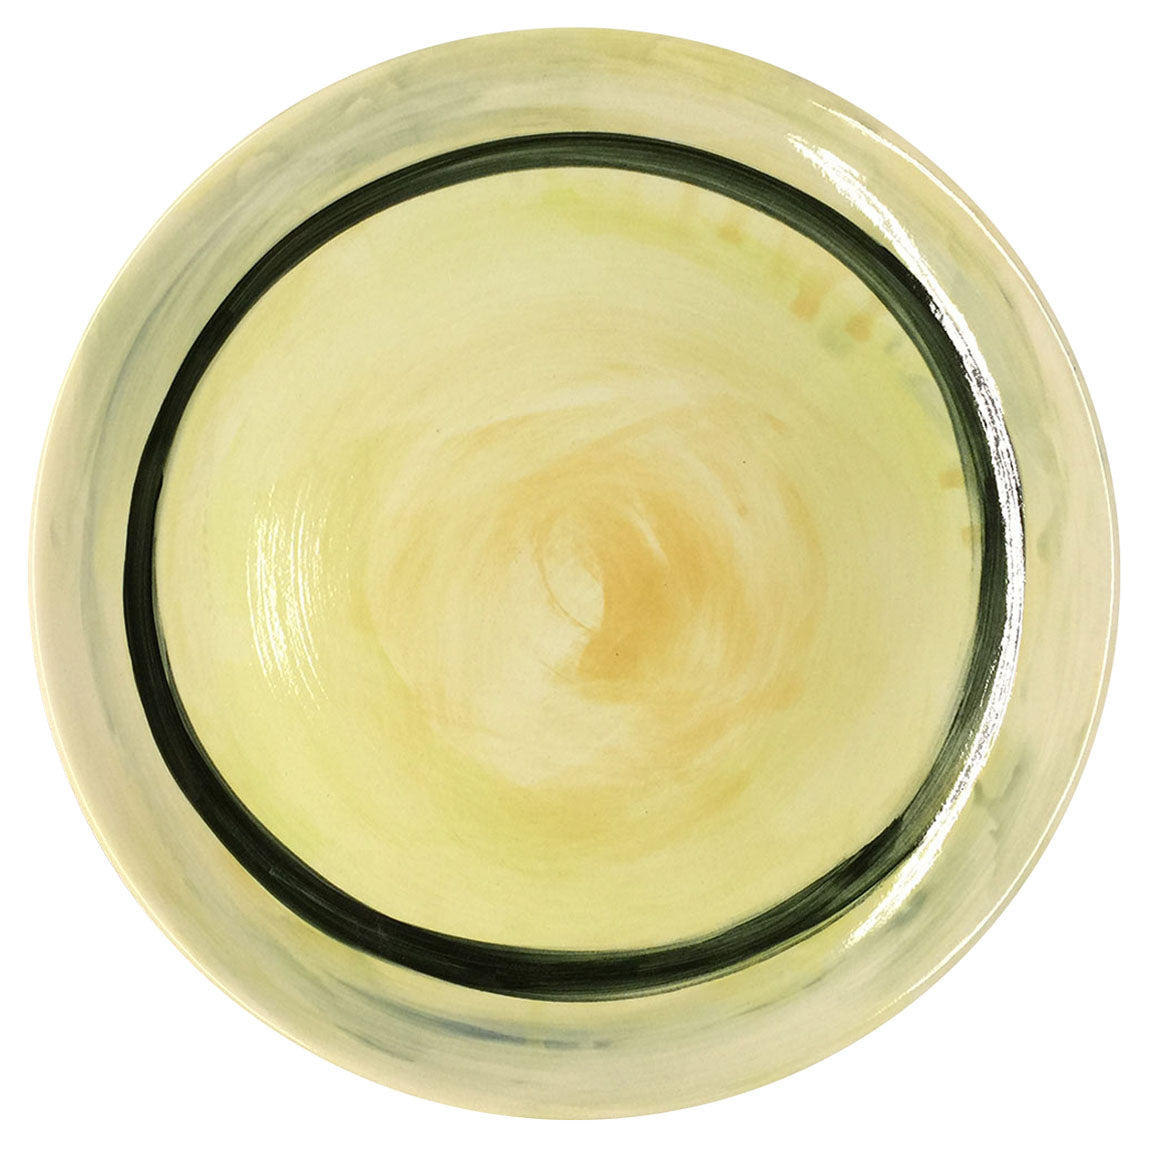 PLATTER #14 - CHARTREUSE, GOLD, BLUE & BLACK - HAND-PAINTED EARTHENWARE